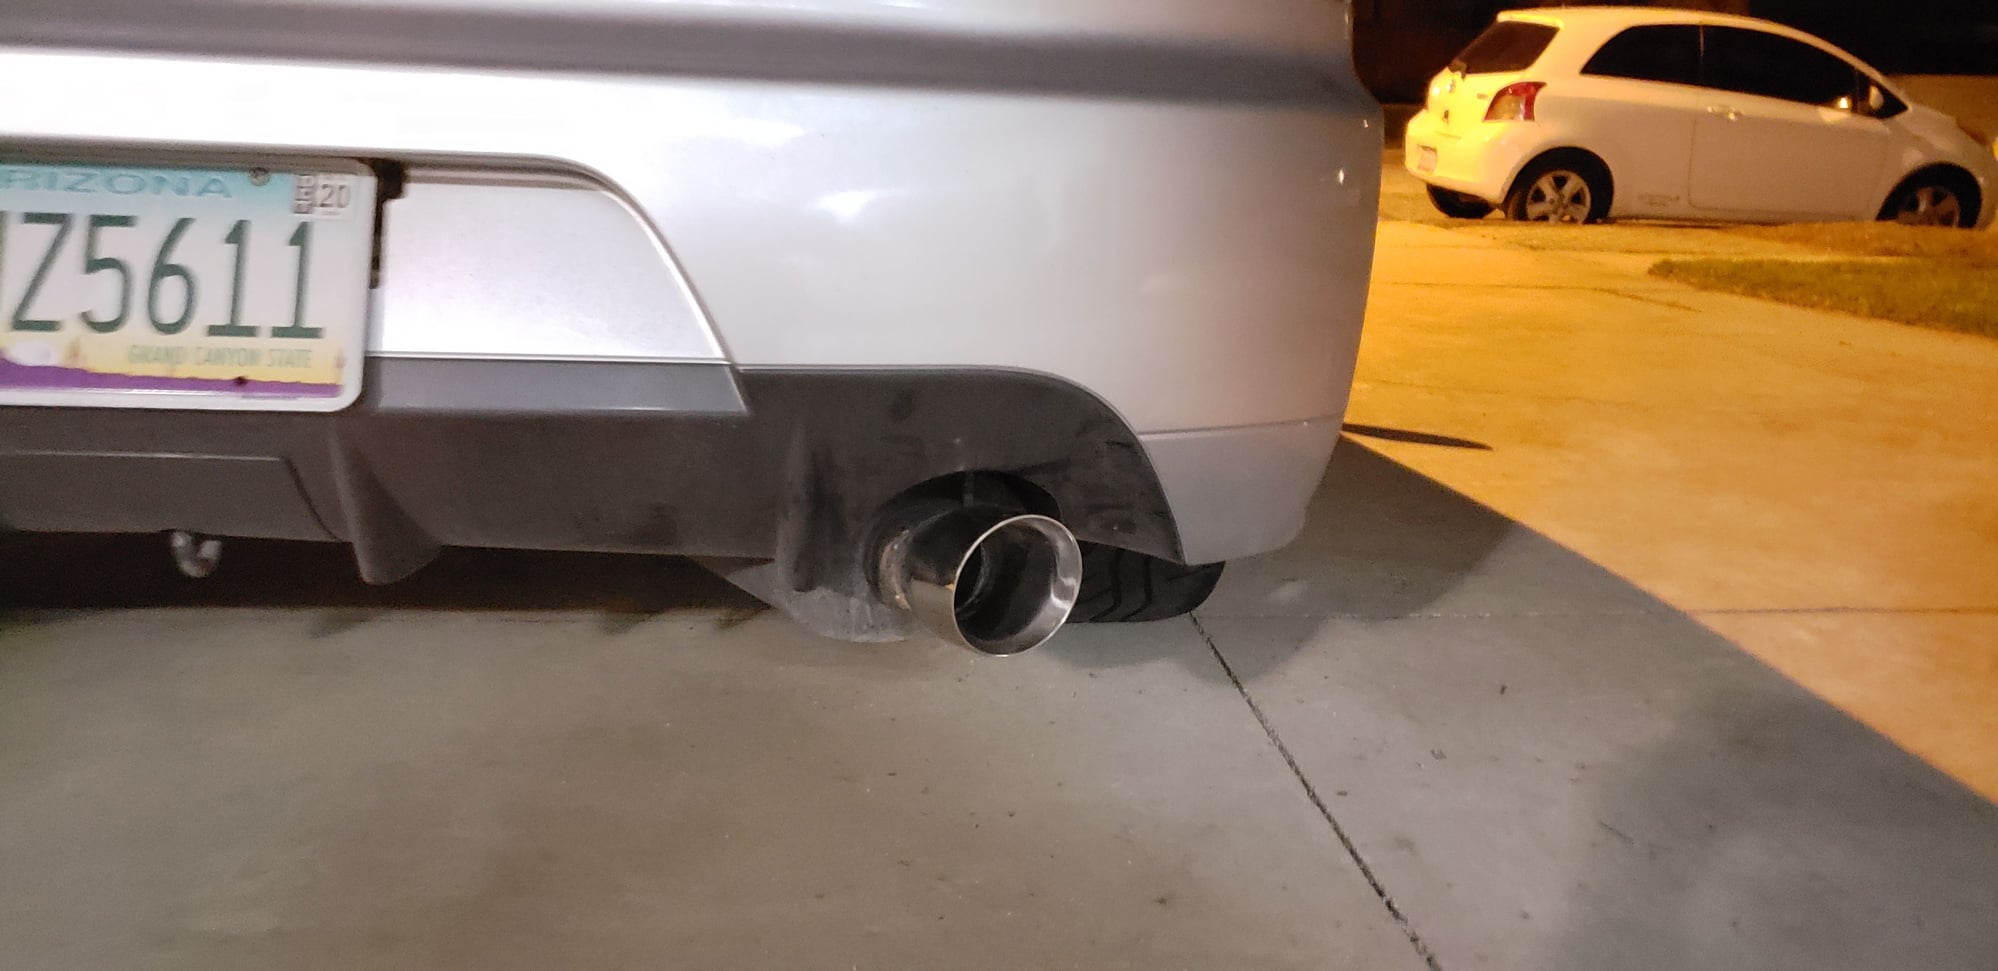 Engine - Exhaust - SoCal guys - Who wants a RRE Stealth Exhaust? Want to trade mine - Used - 2003 to 2006 Mitsubishi Lancer Evolution - San Bernardino, CA 92407, United States